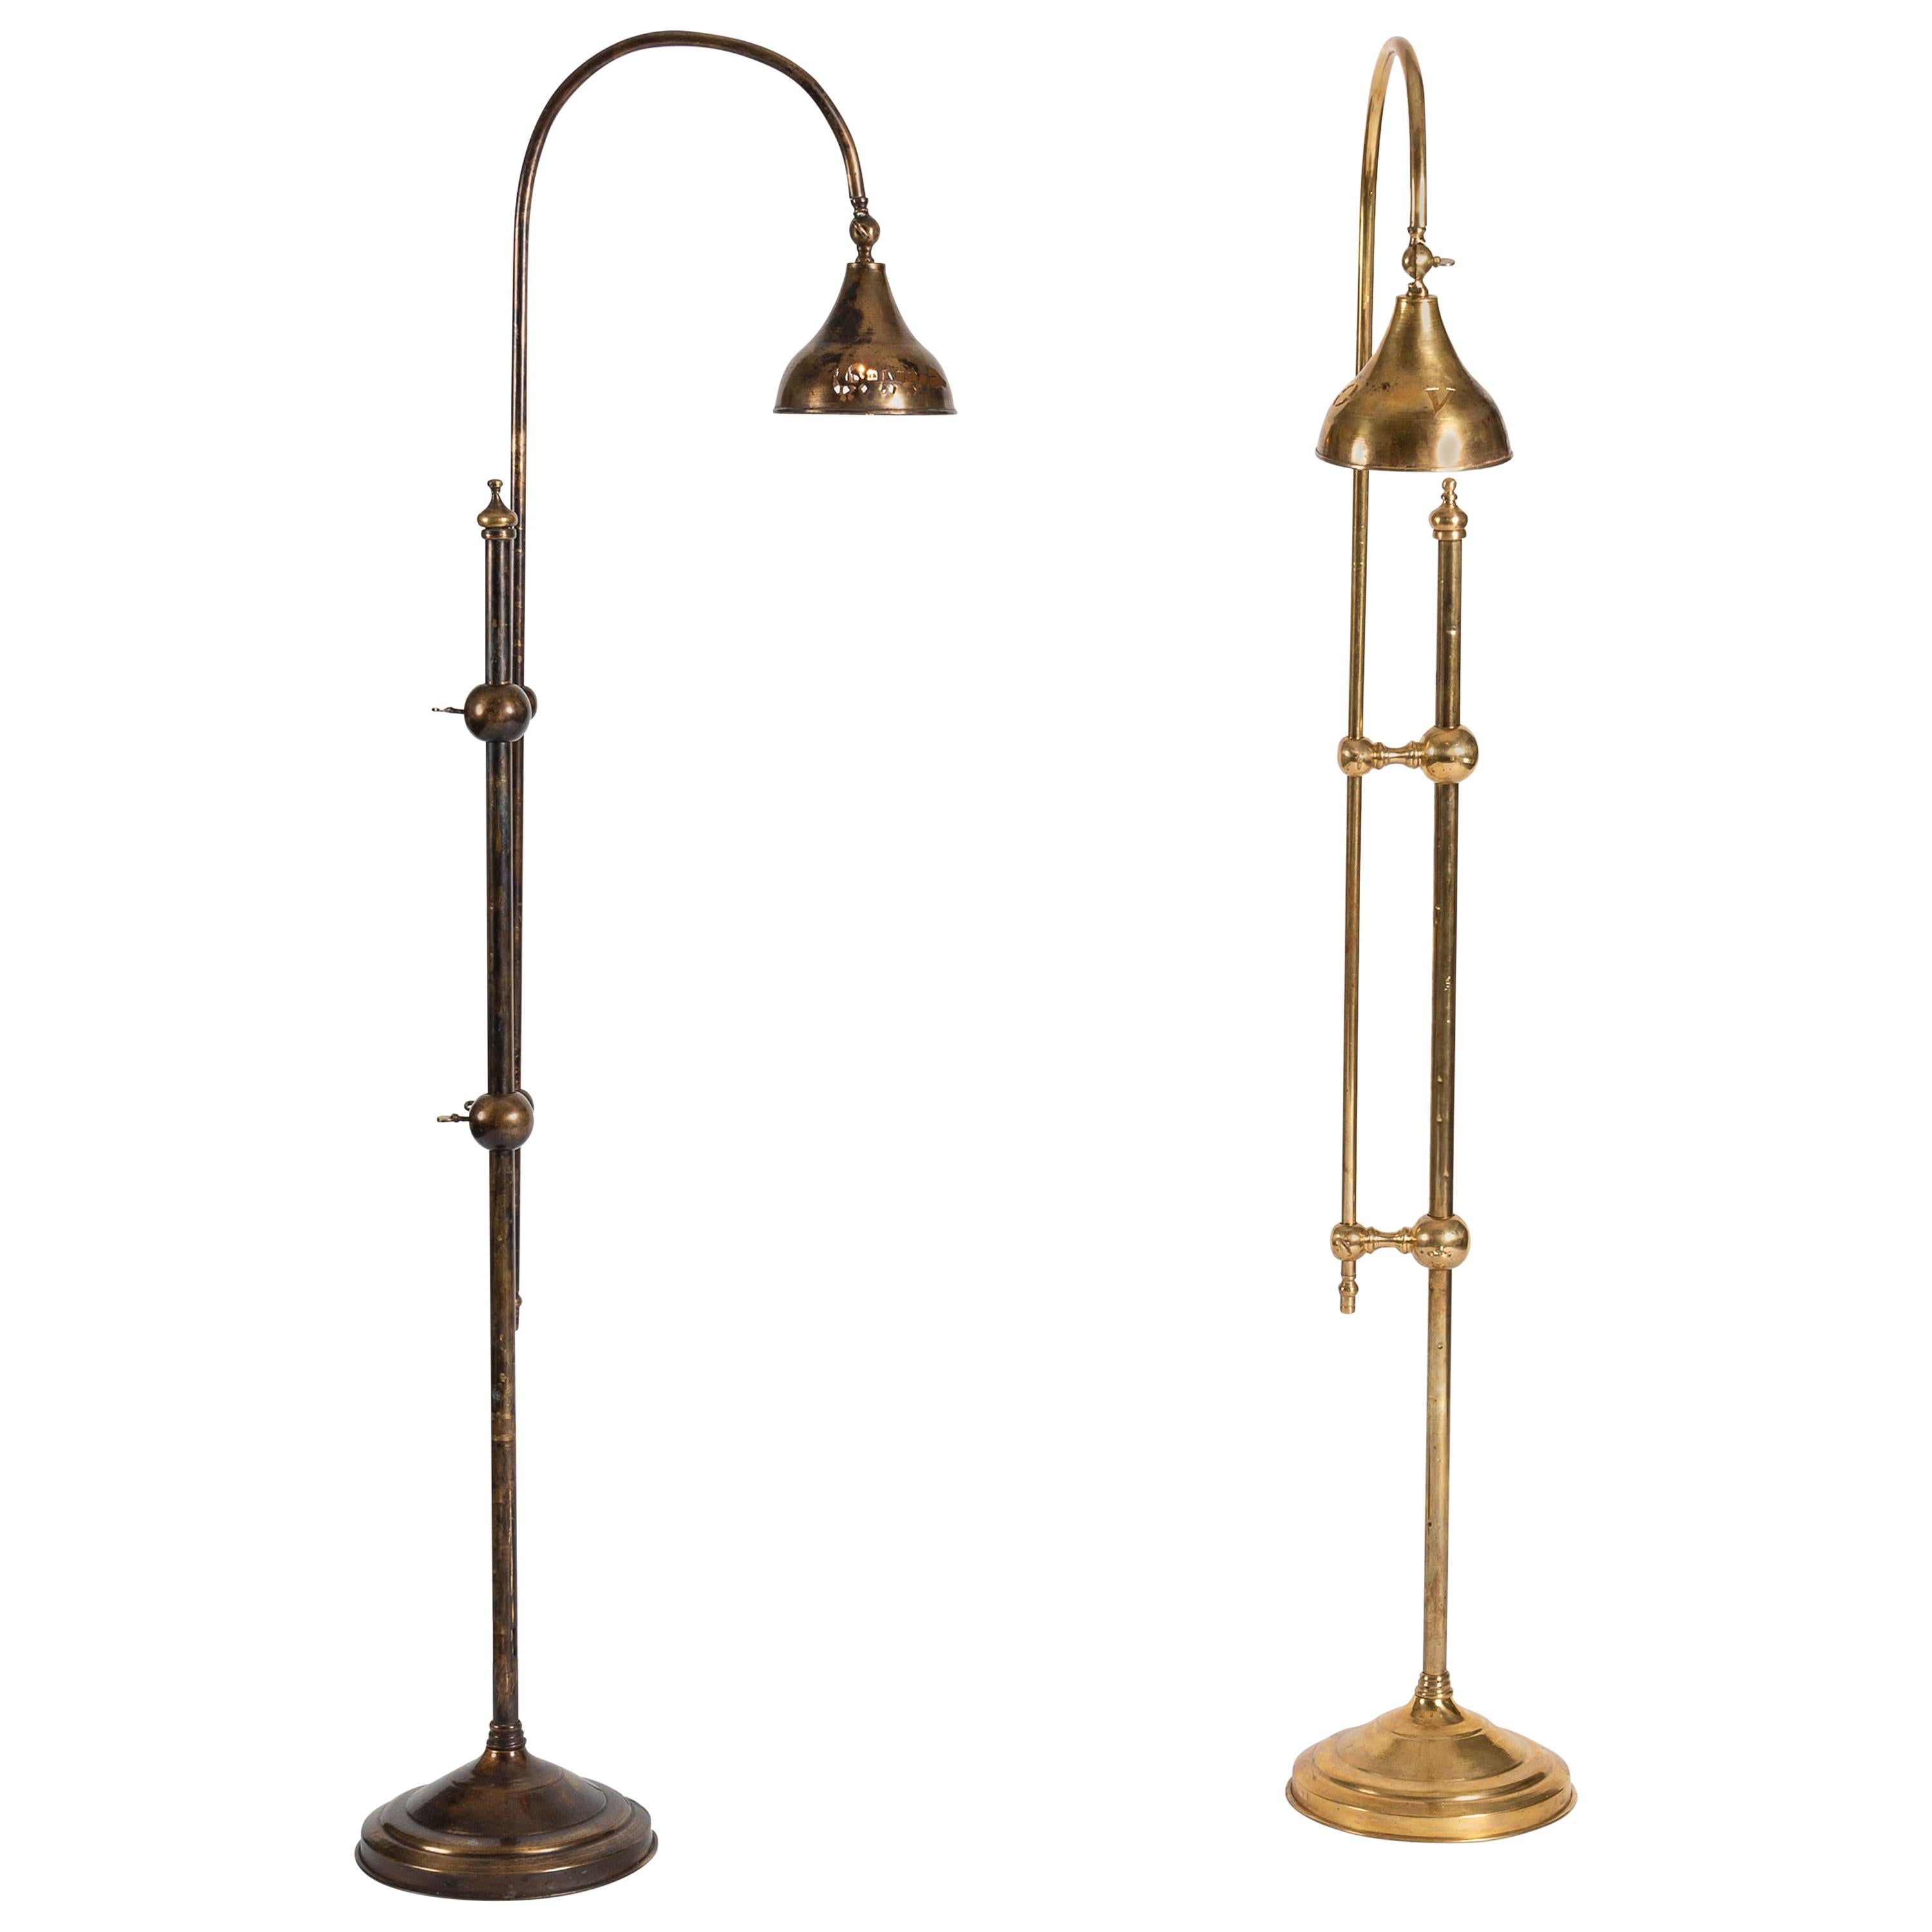 Bill Willis, Matched Pair of Articulated Floor Lamps, Morocco, Late 20th Century